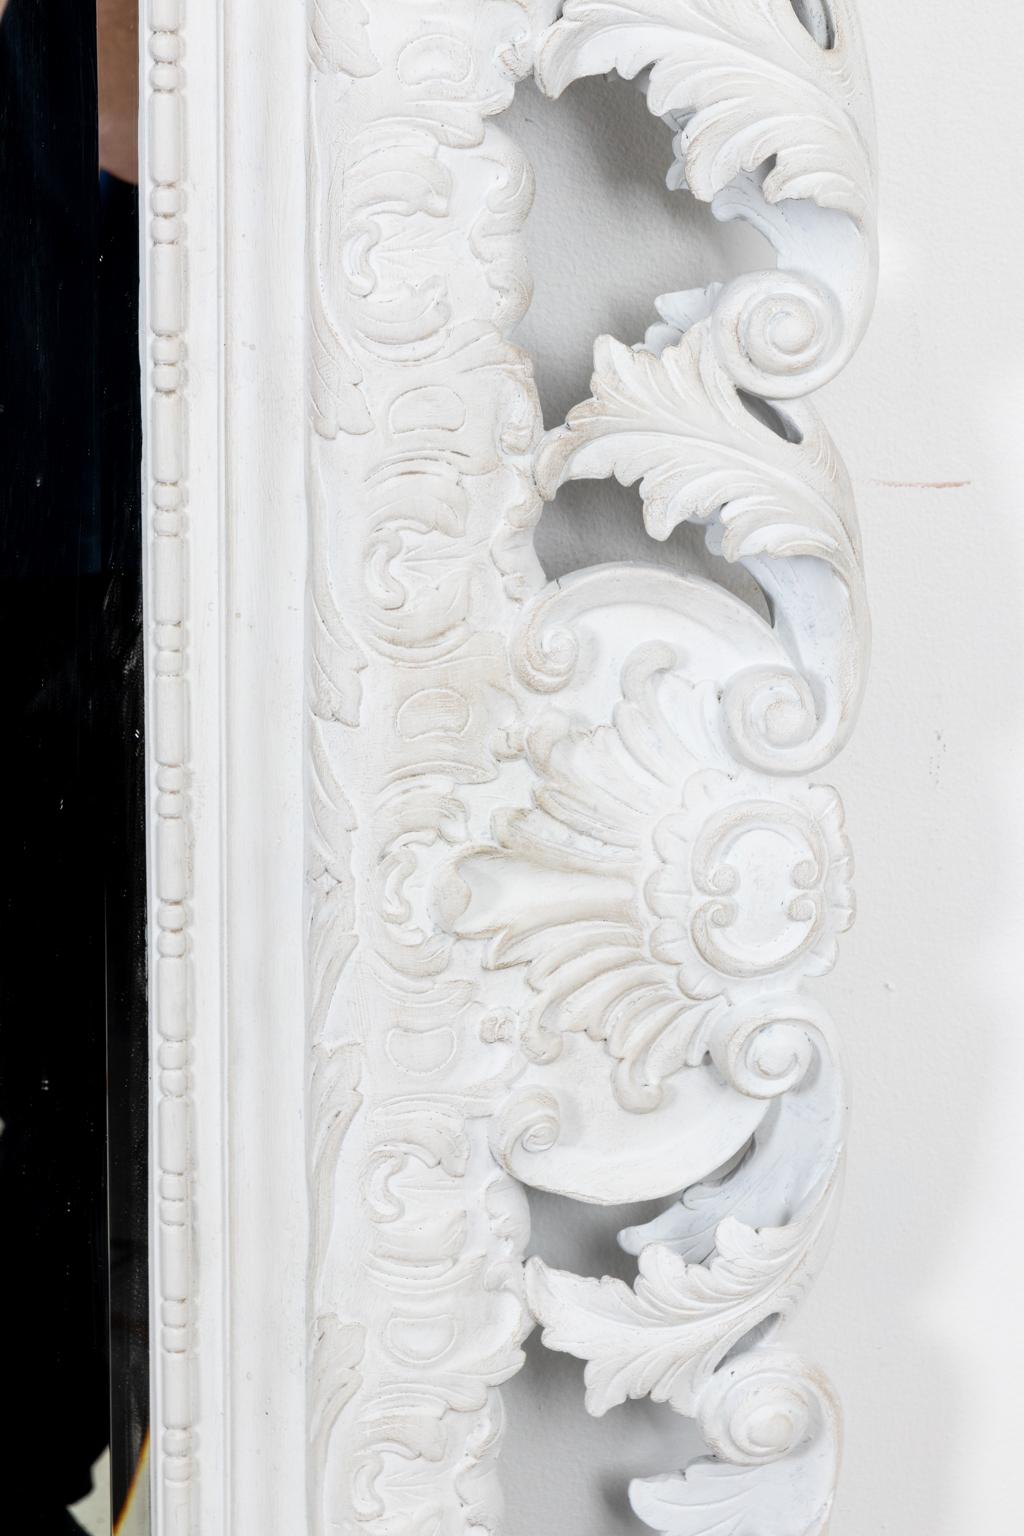 Circa 1980s robustly carved and white painted Rococo style mirror with scrolled foliage detail on the frame. Newly painted in a chalky white and over scaled at 4' by 5 '. Please note of wear consistent with age including minor chips and scuffs. The